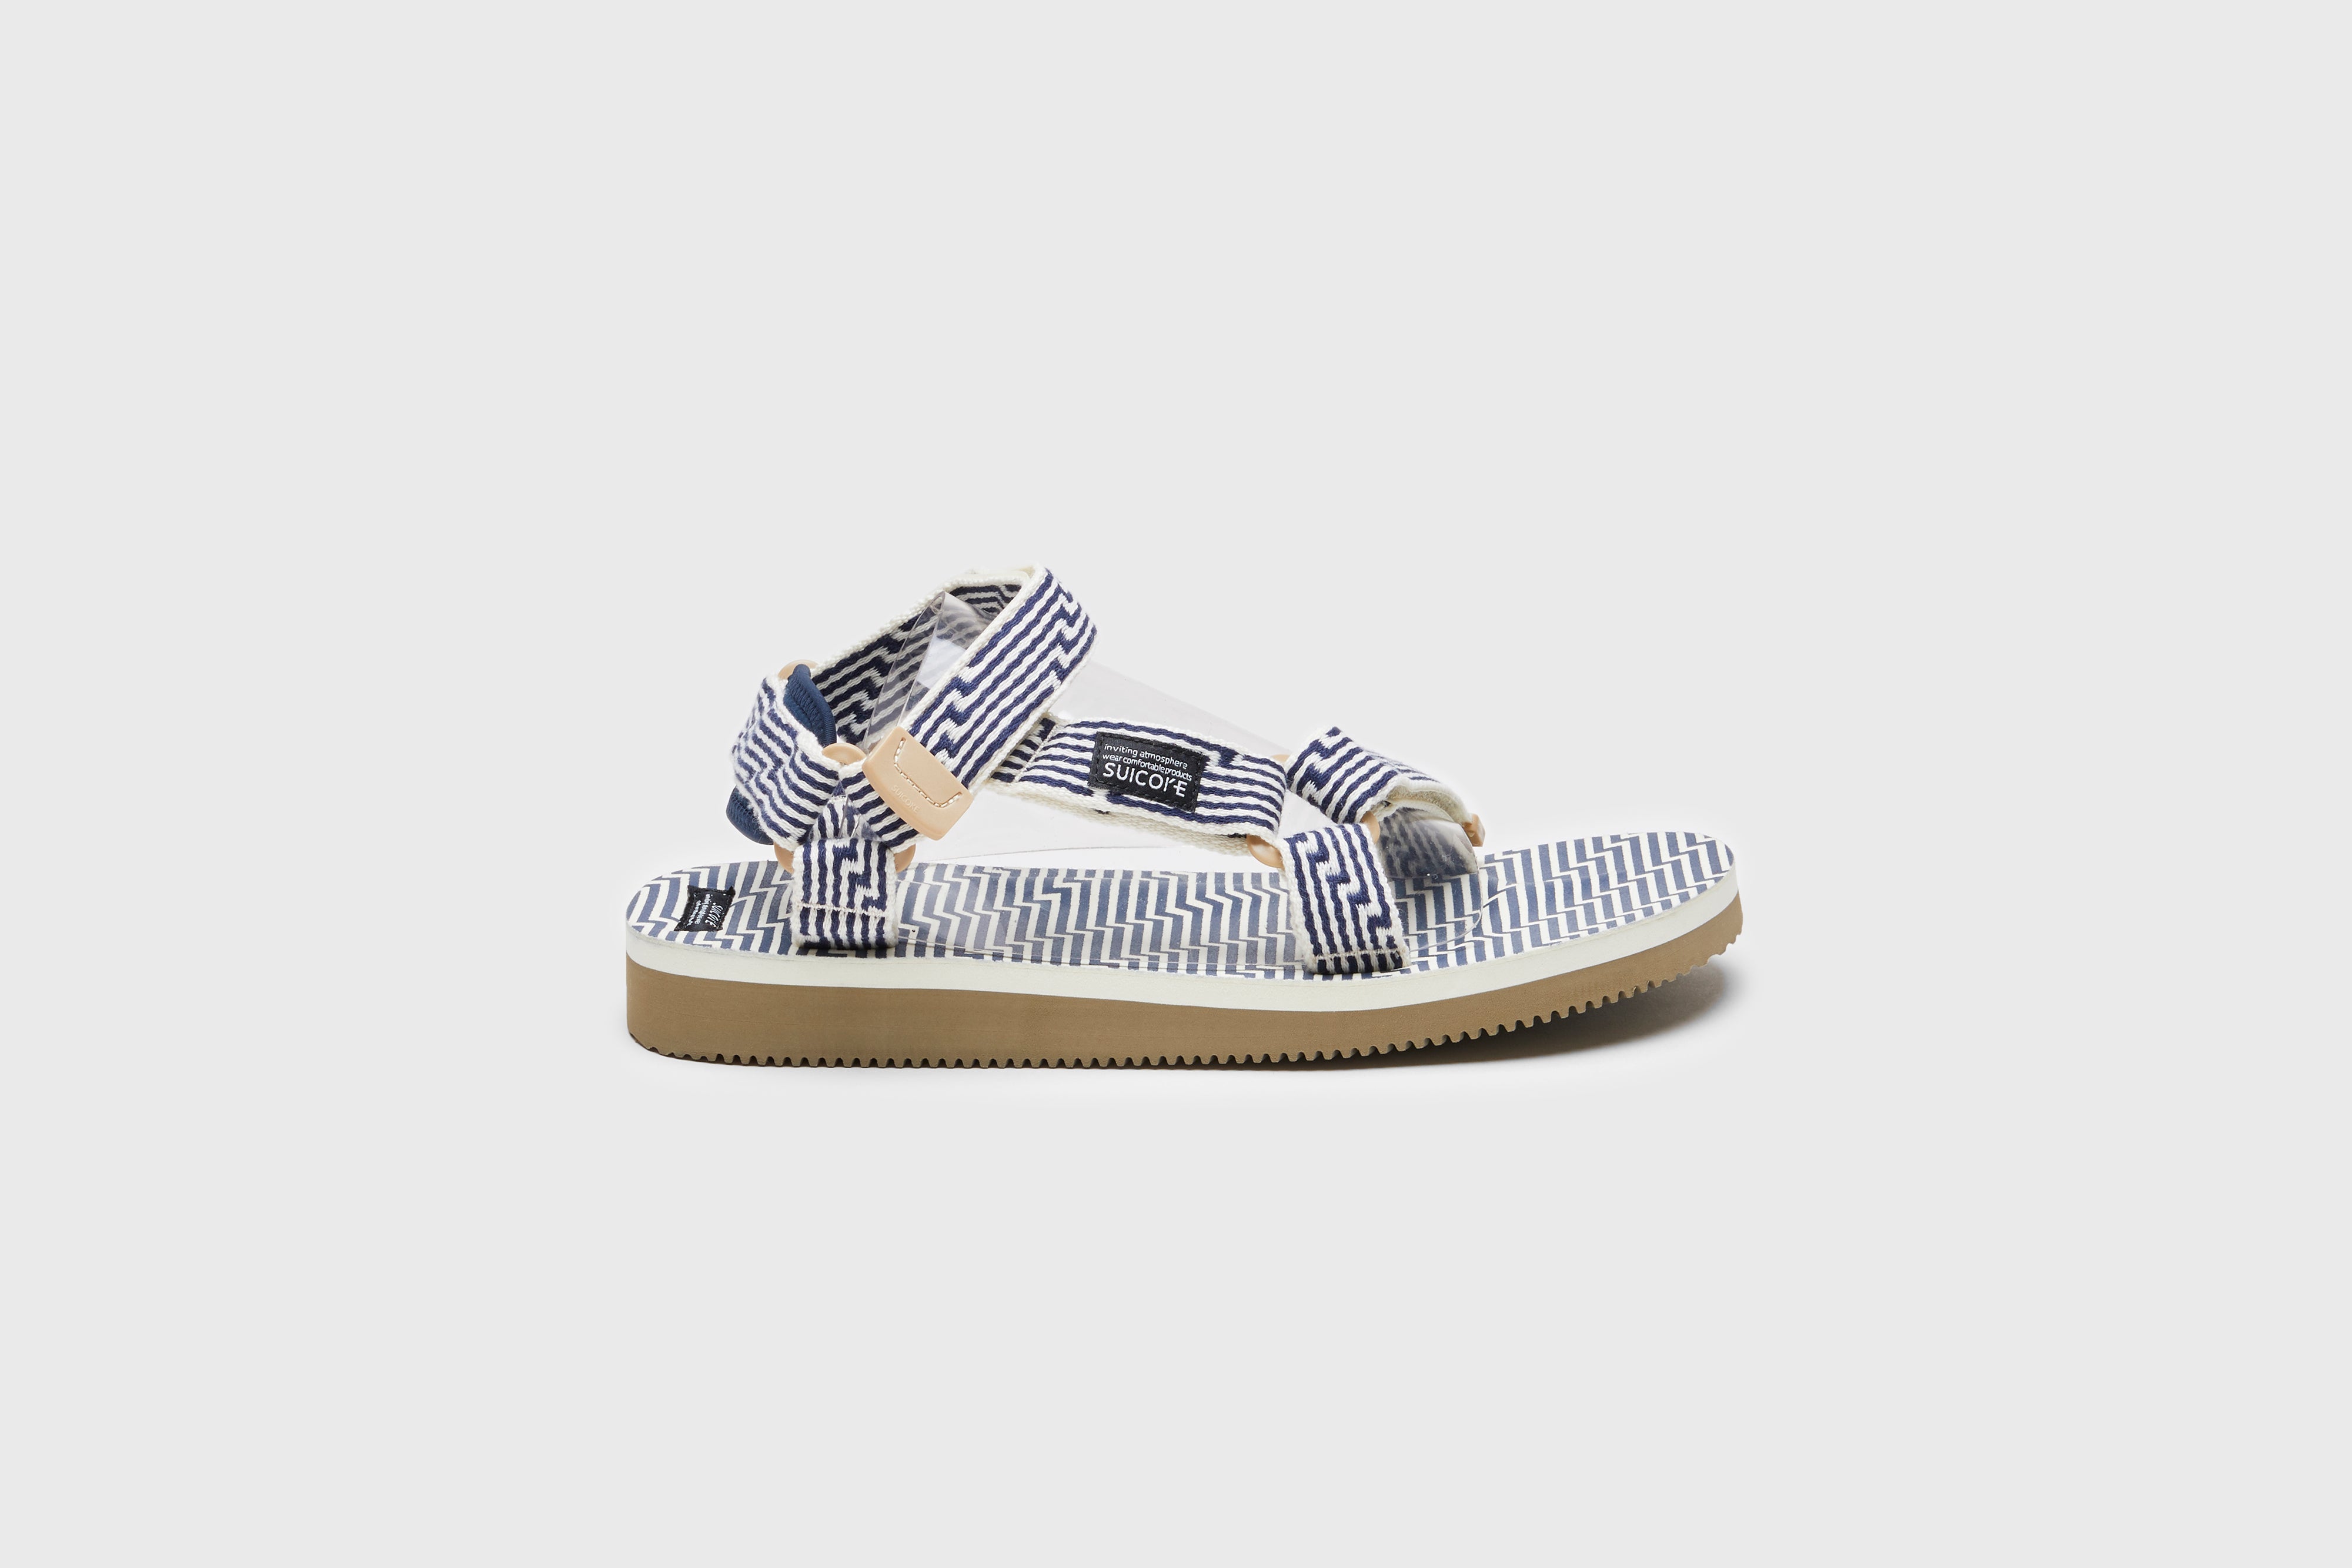 SUICOKE DEPA-JC01 sandals with ivory & navy nylon upper, ivory & navy midsole and sole, strap and logo patch. From Spring/Summer 2023 collection on eightywingold Web Store, an official partner of SUICOKE. OG-022-JC01 IVORY X NAVY